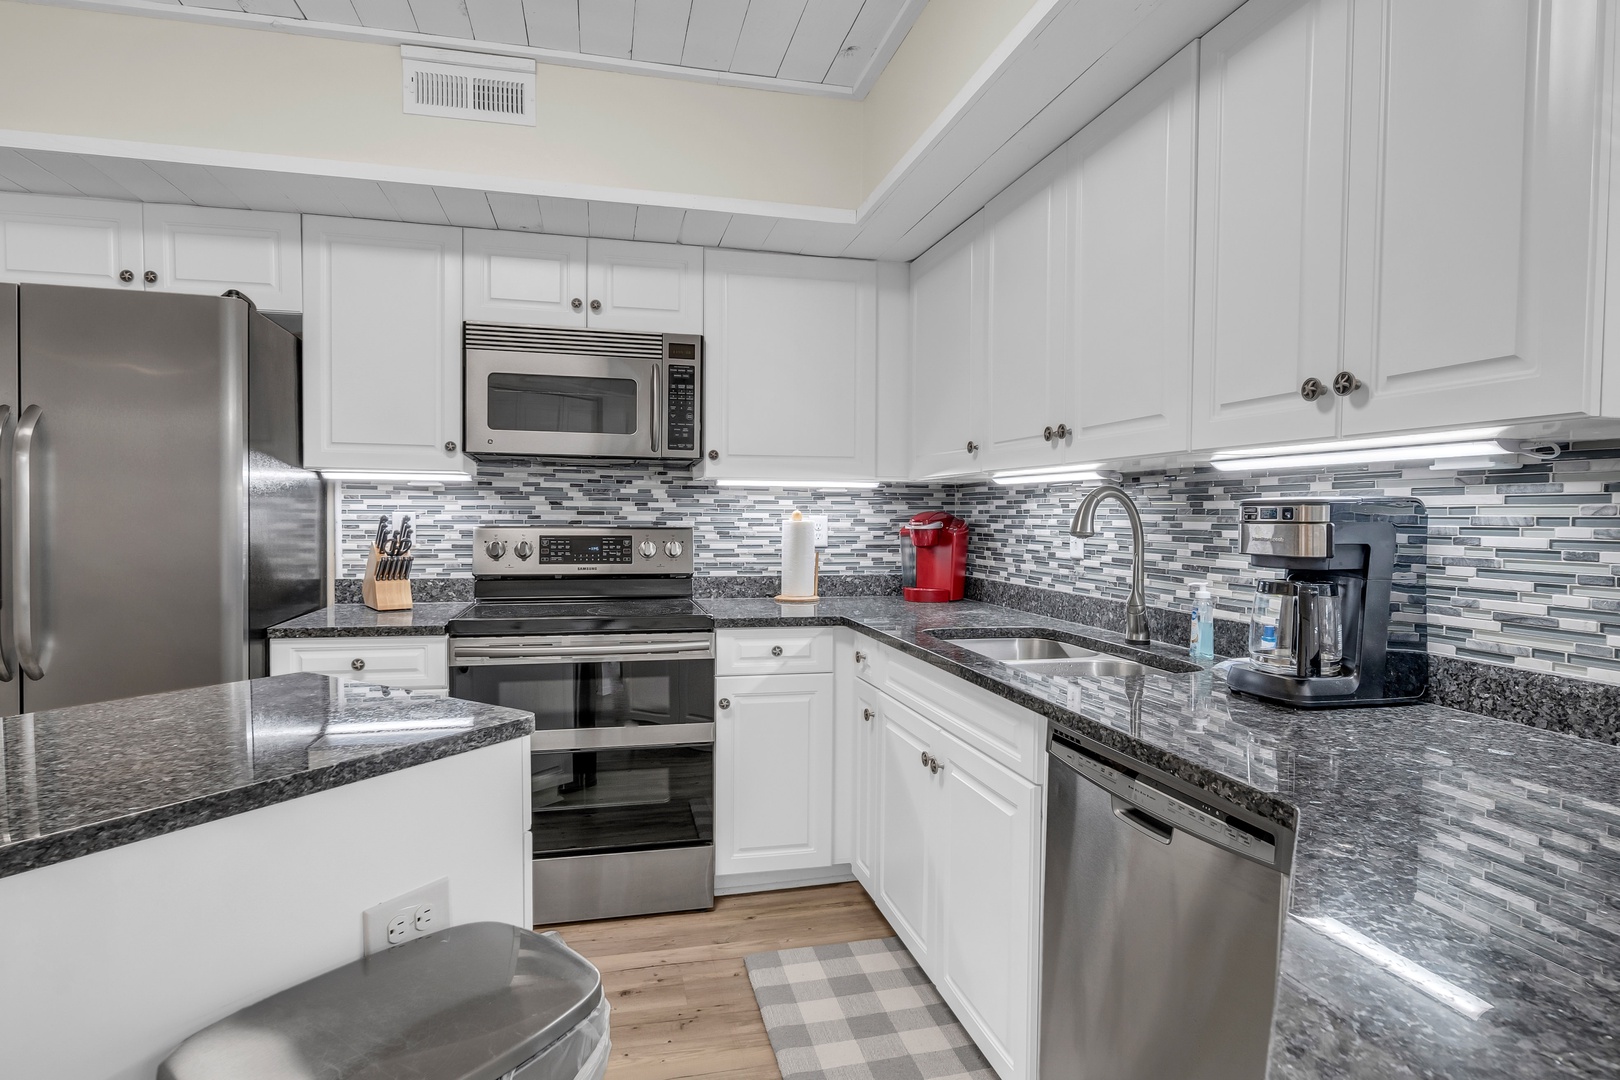 Newly renovated kitchen with stainless steel appliances